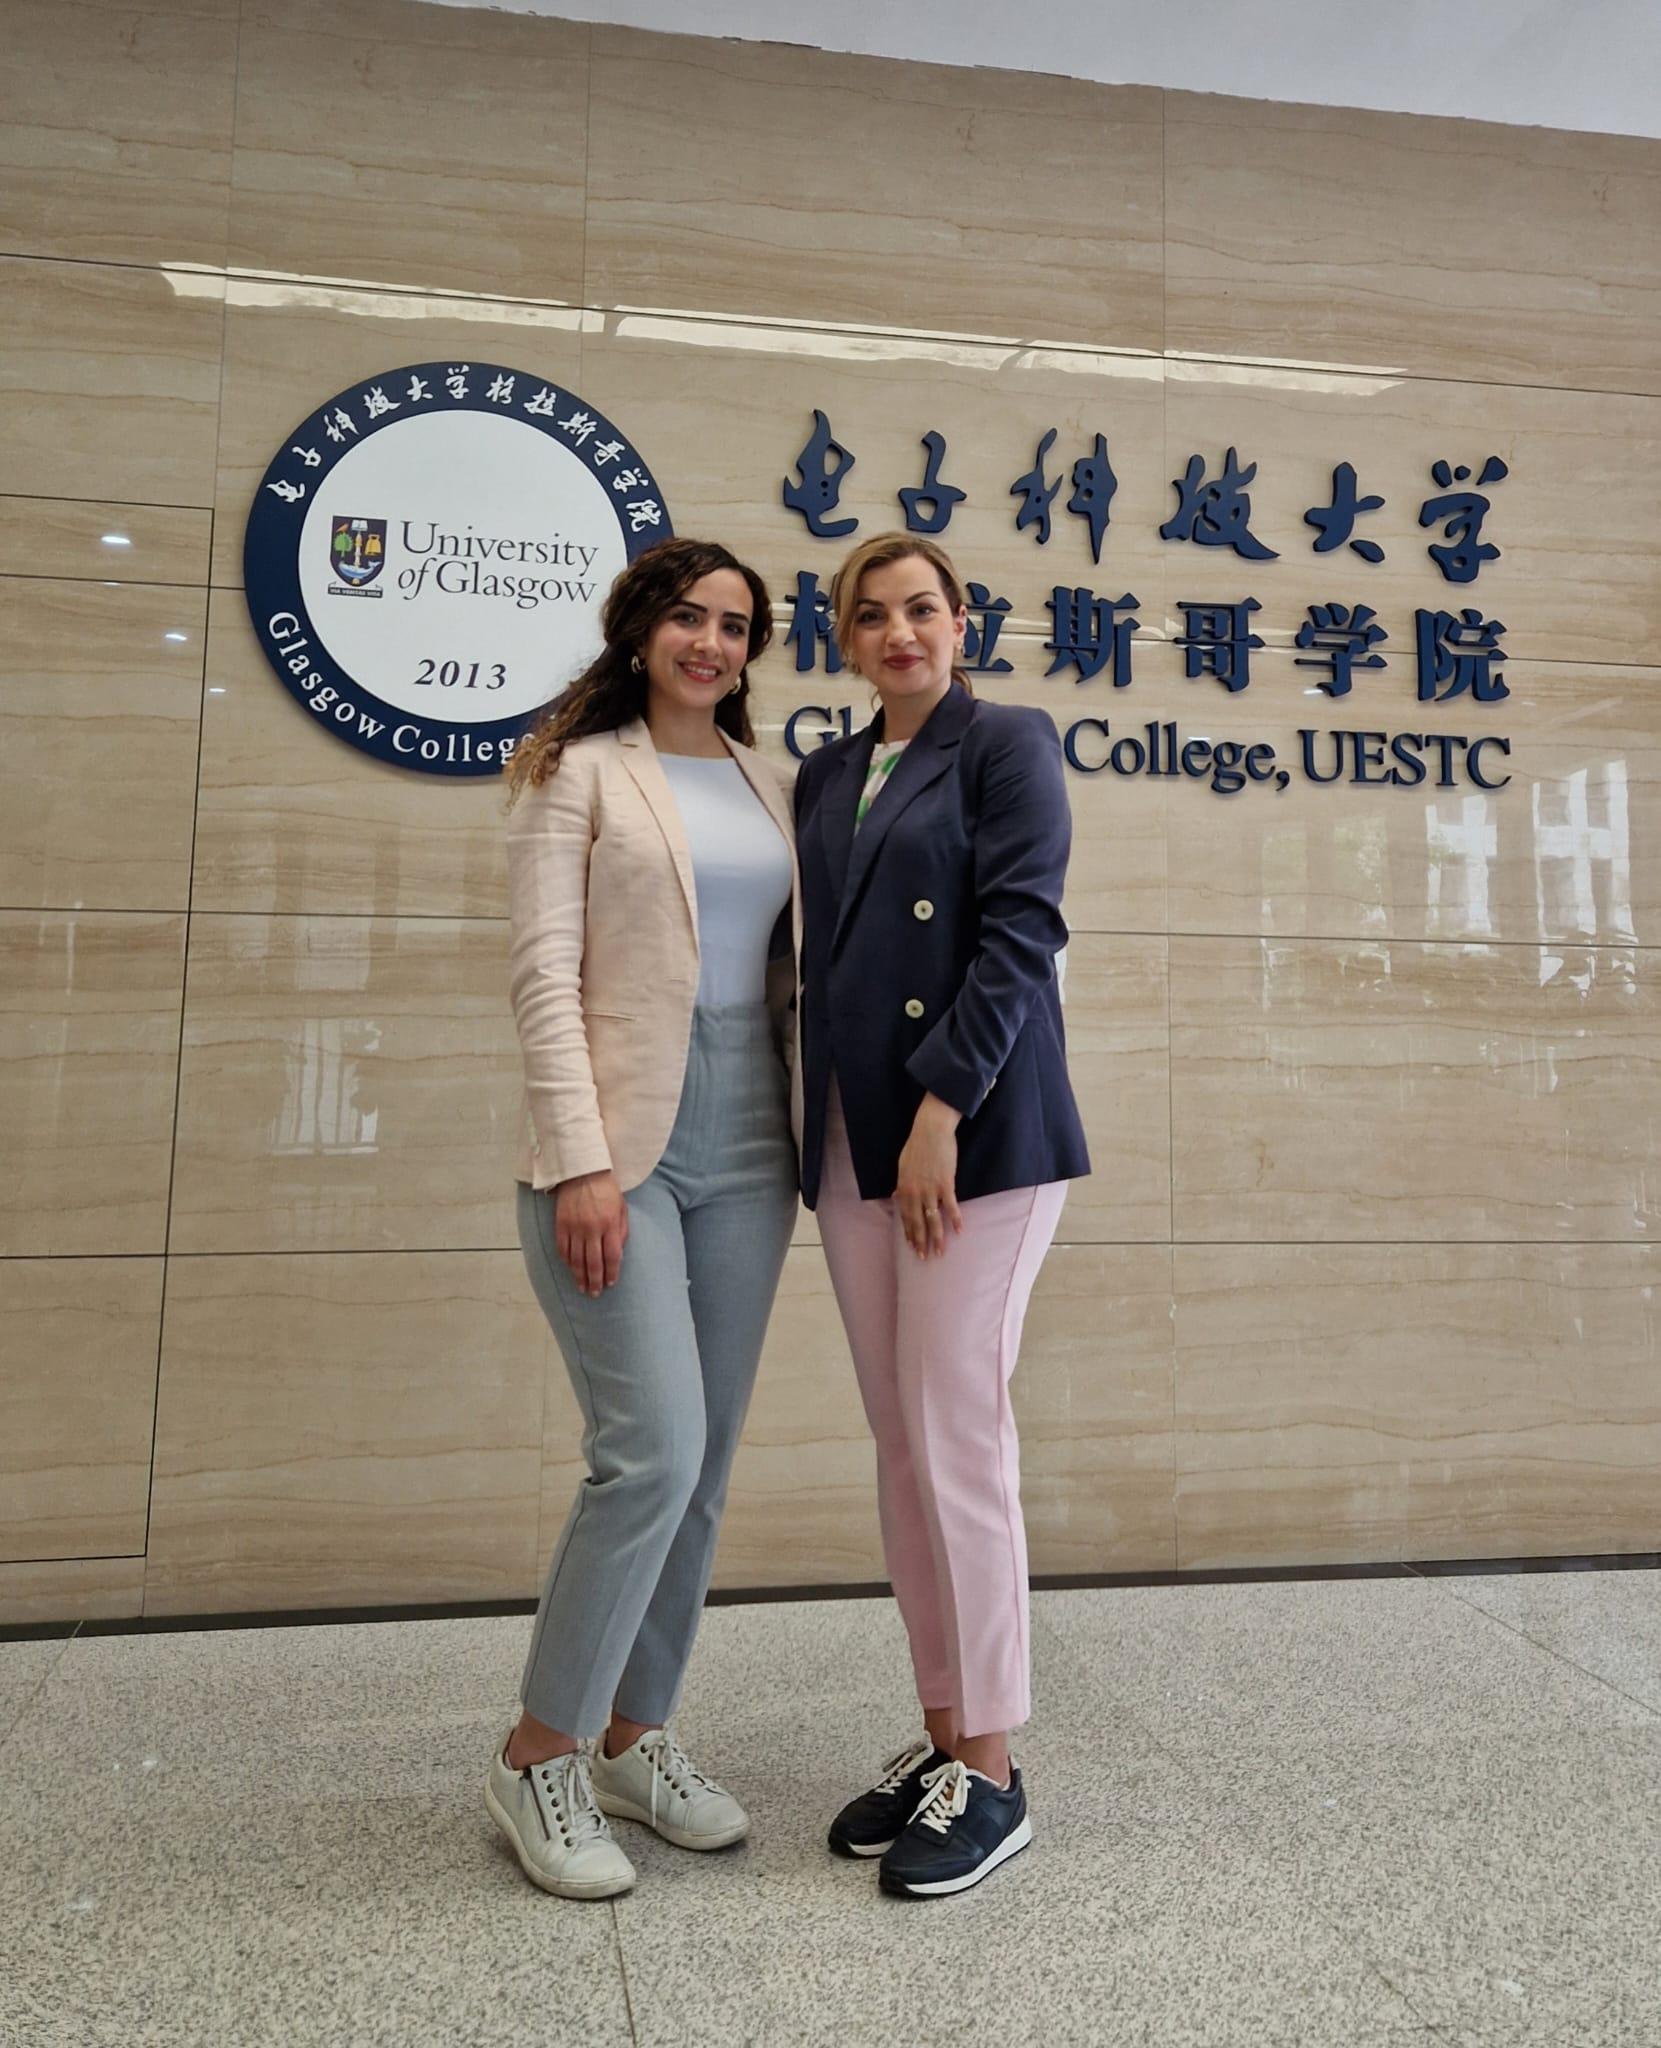 Dr Hanaa Abumarshoud and Dr Lina Mohjazi stand in the lobby of a building at Glasgow College, UESTC in Chengdu (China)